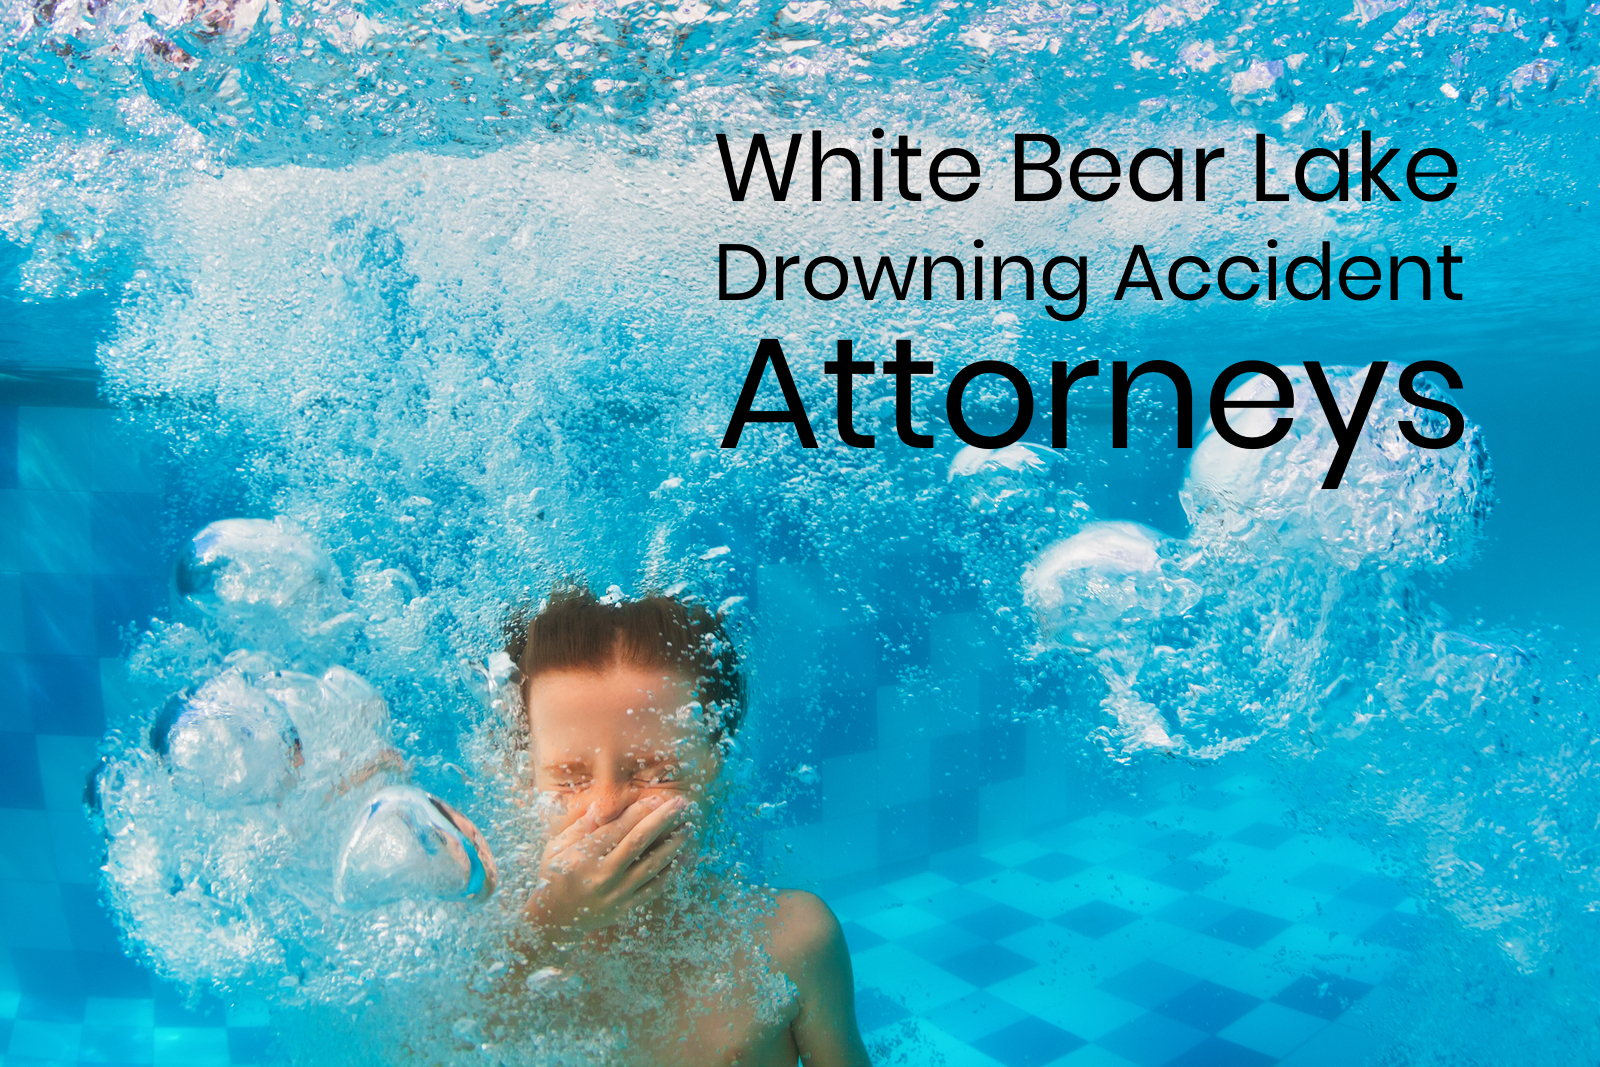 child accidental drowning - white bear lake drowning accident attorneys - Sand Law LLC Minnesota